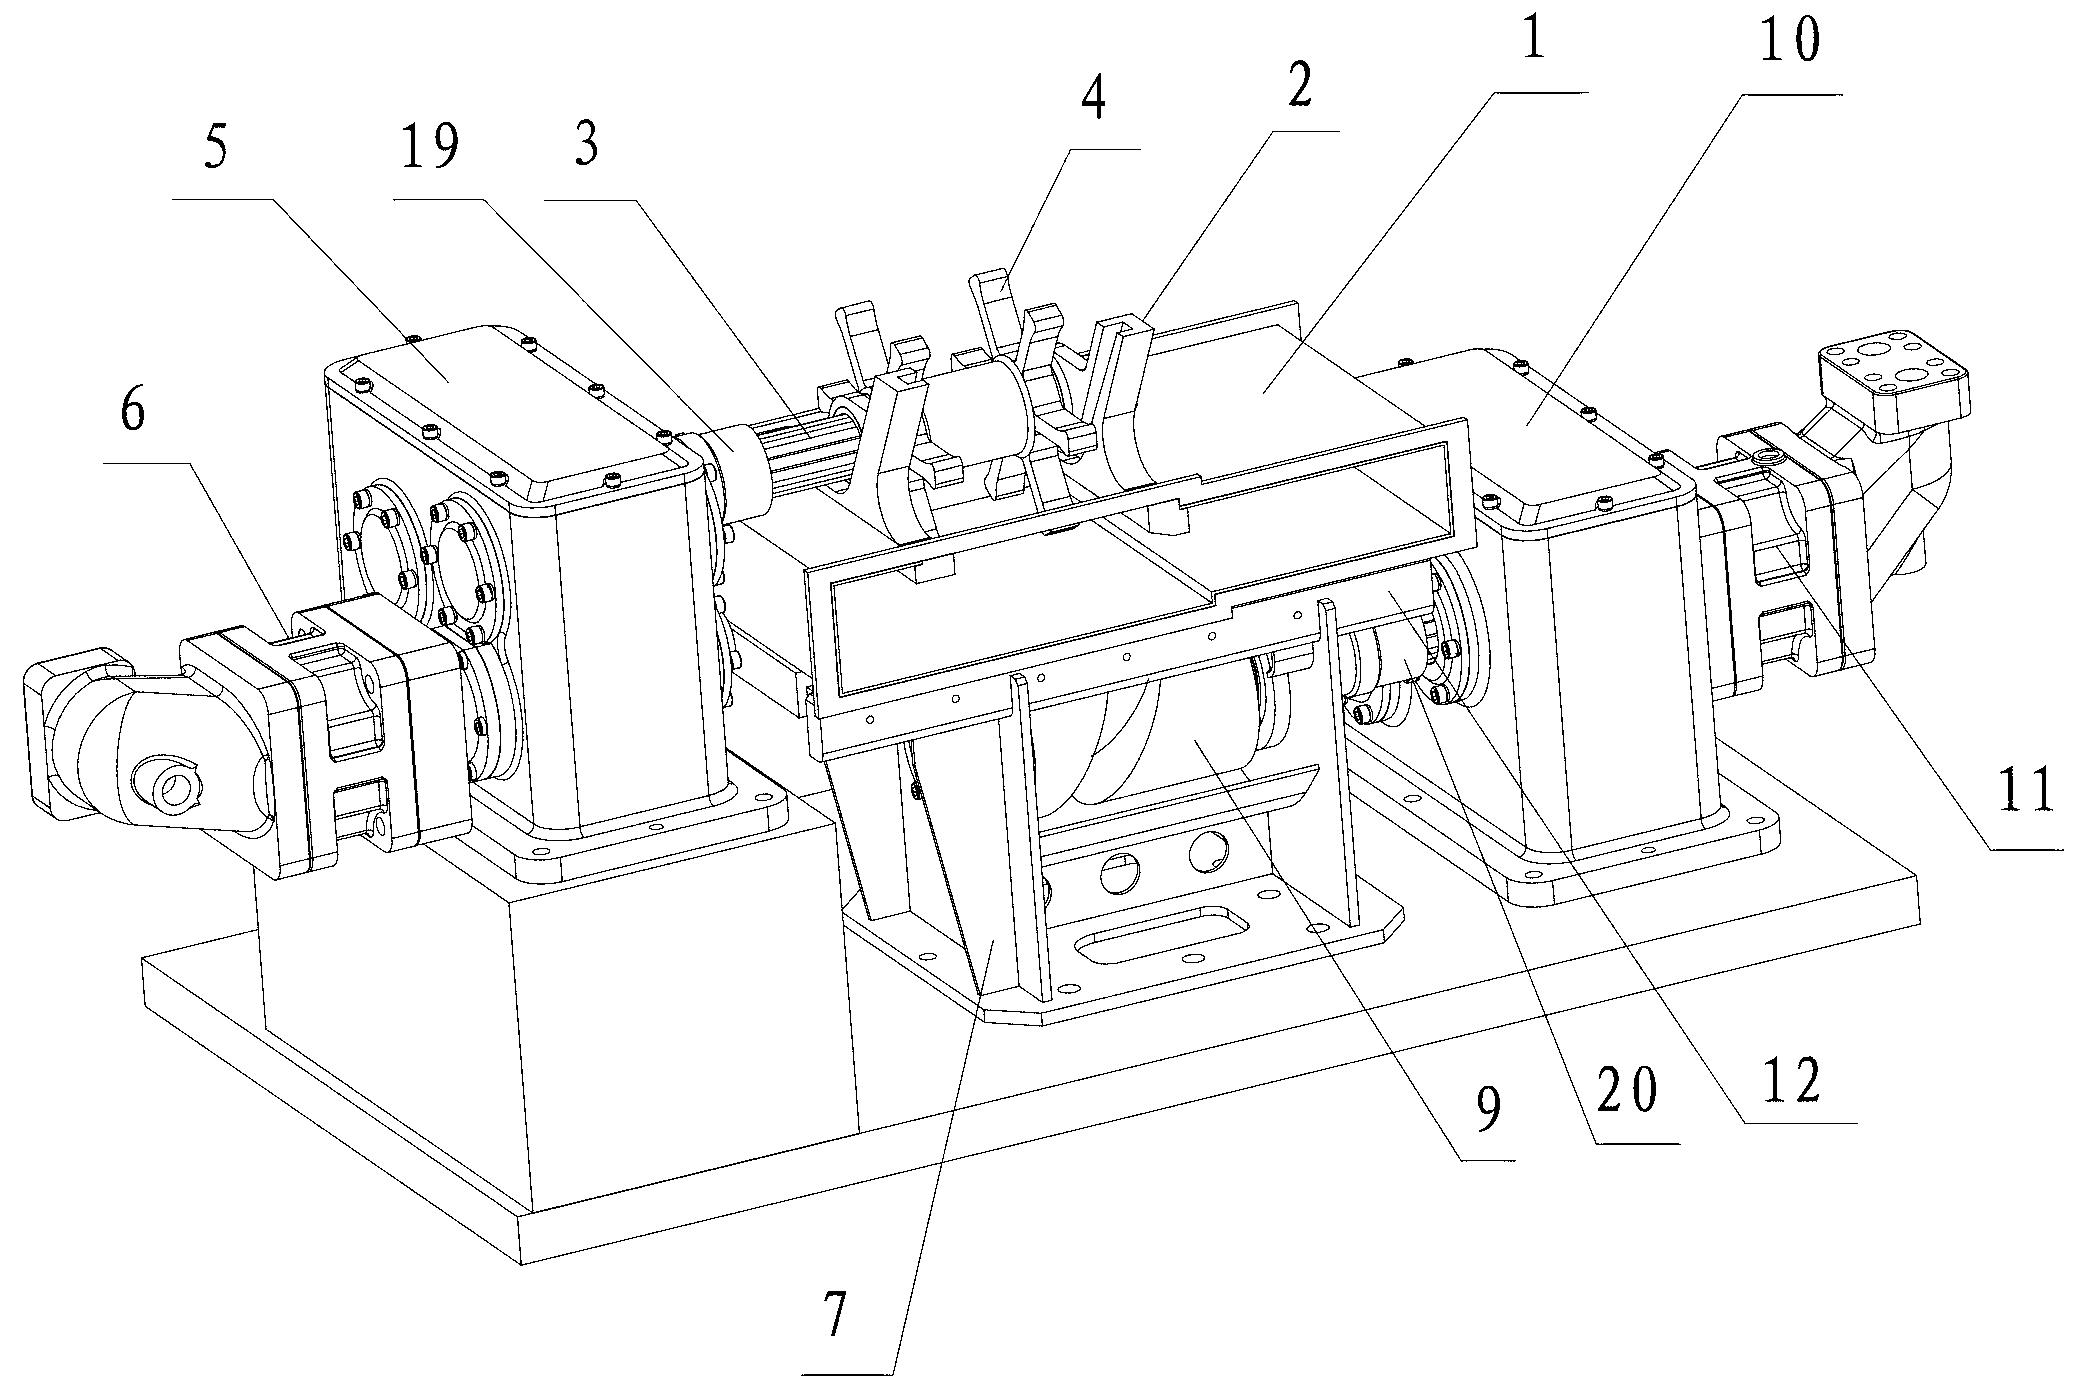 Ammunition link small-diameter artillery ammunition feeding and recoil and counter-recoil analog device